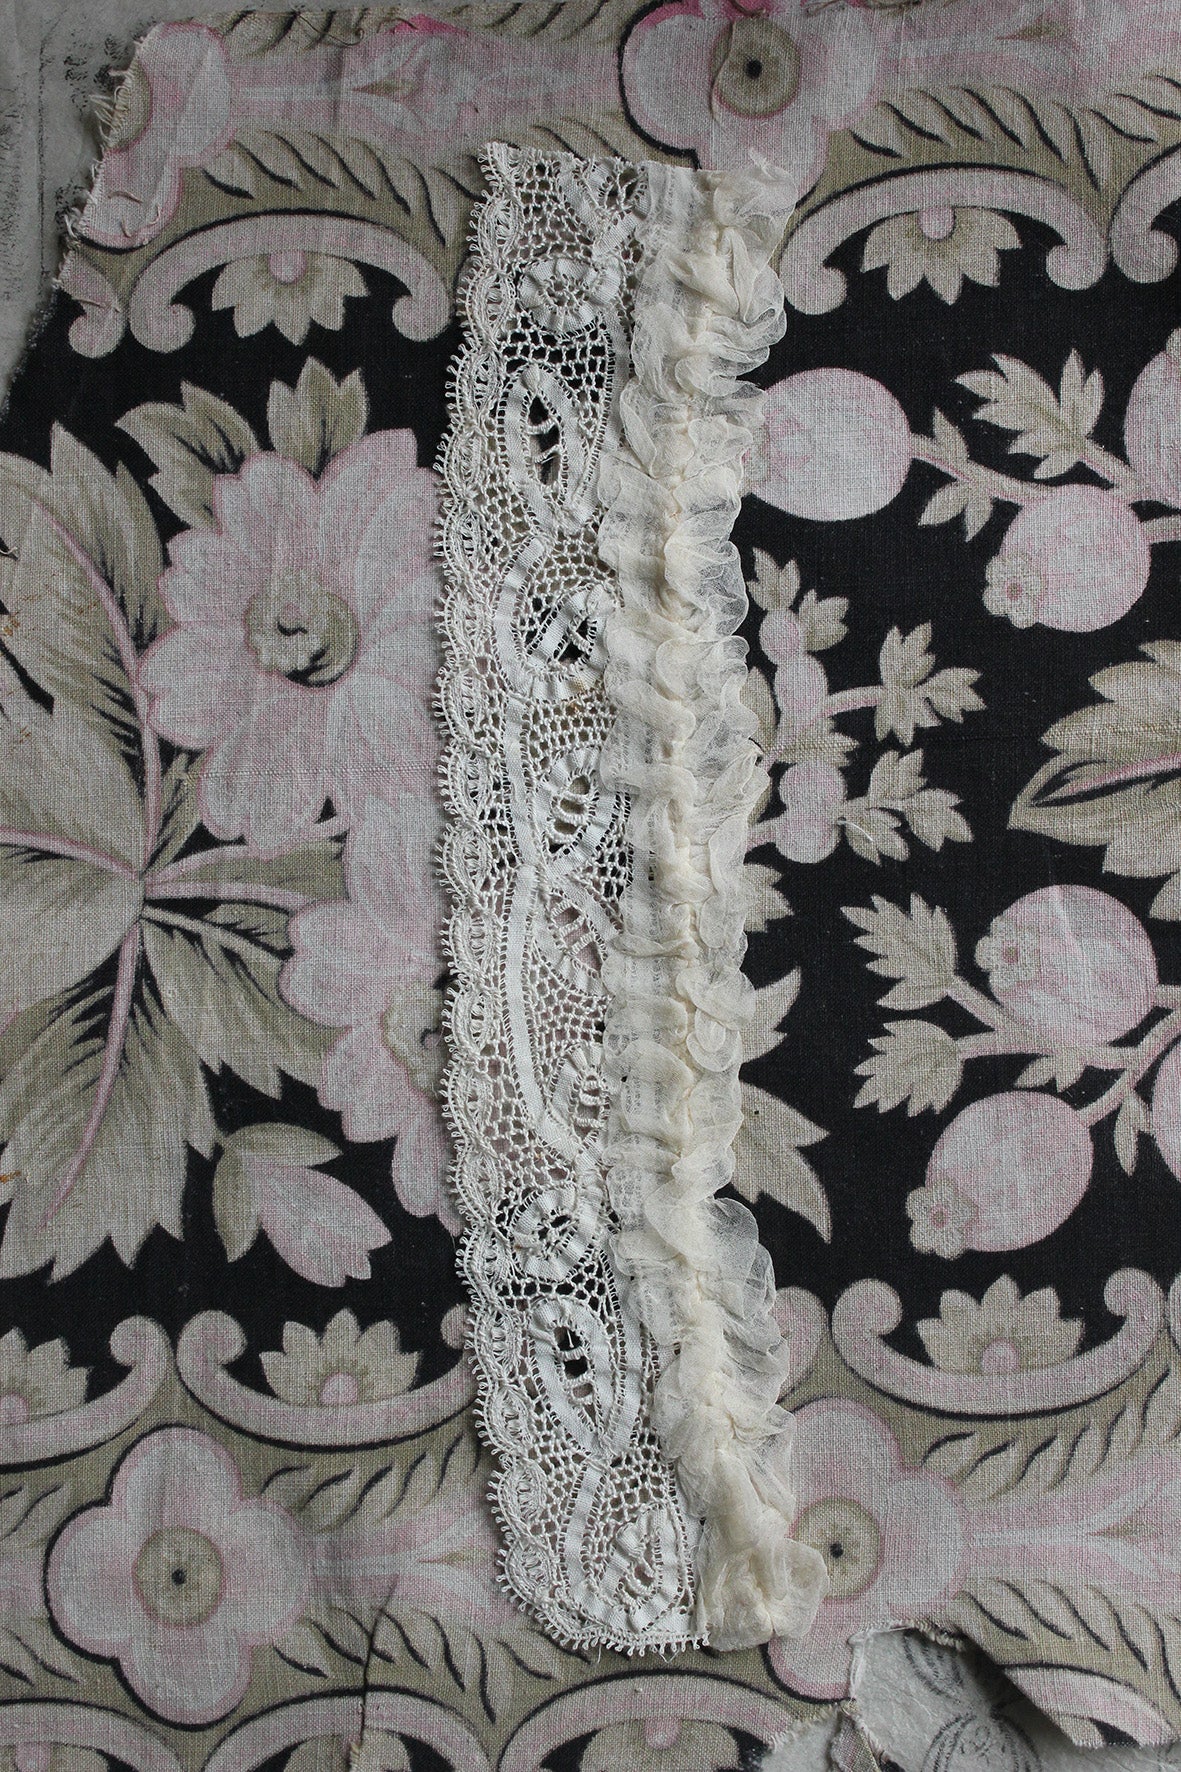 Old Lace And Chiffon Collar Edging